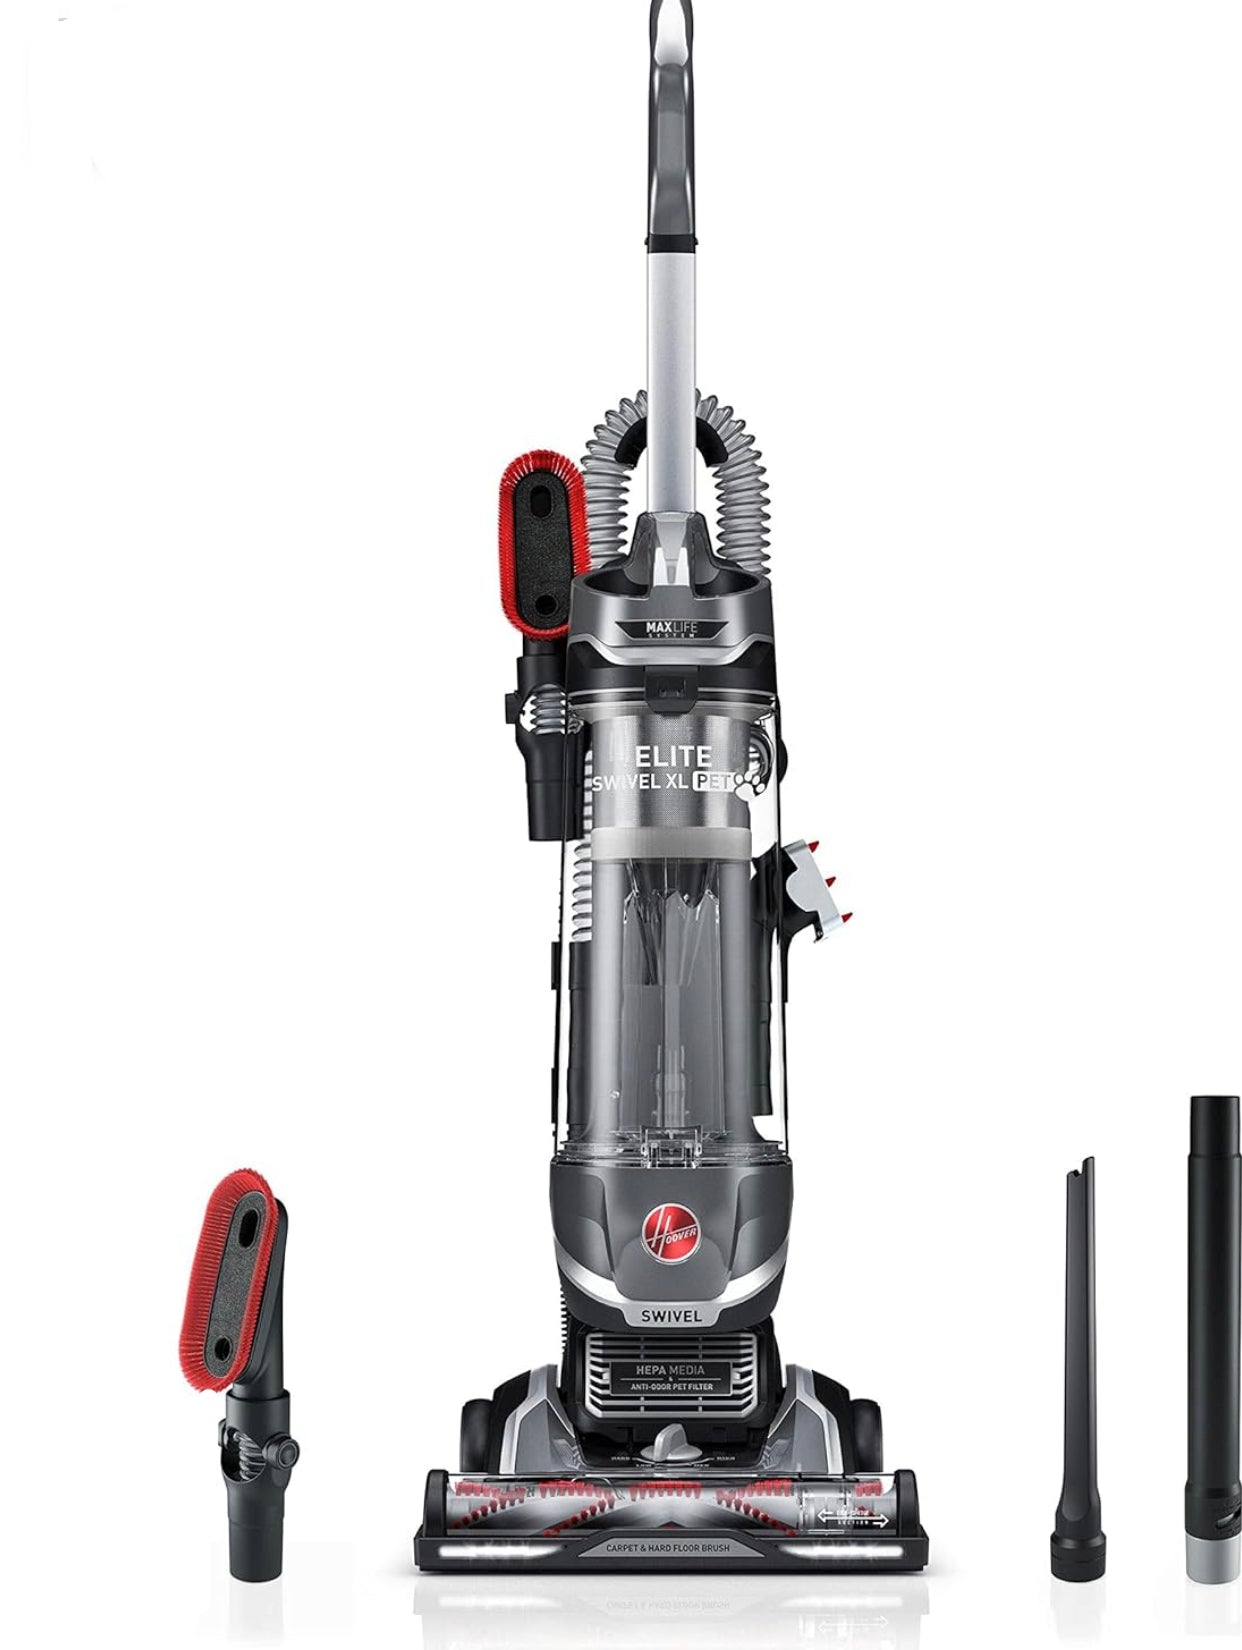 Hoover MAXLife Elite Swivel XL Pet Vacuum Cleaner with HEPA Media Filtration, Bagless Multi-Surface Upright for Carpets and Hard Floors, UH75250, Grey, 16 lbs